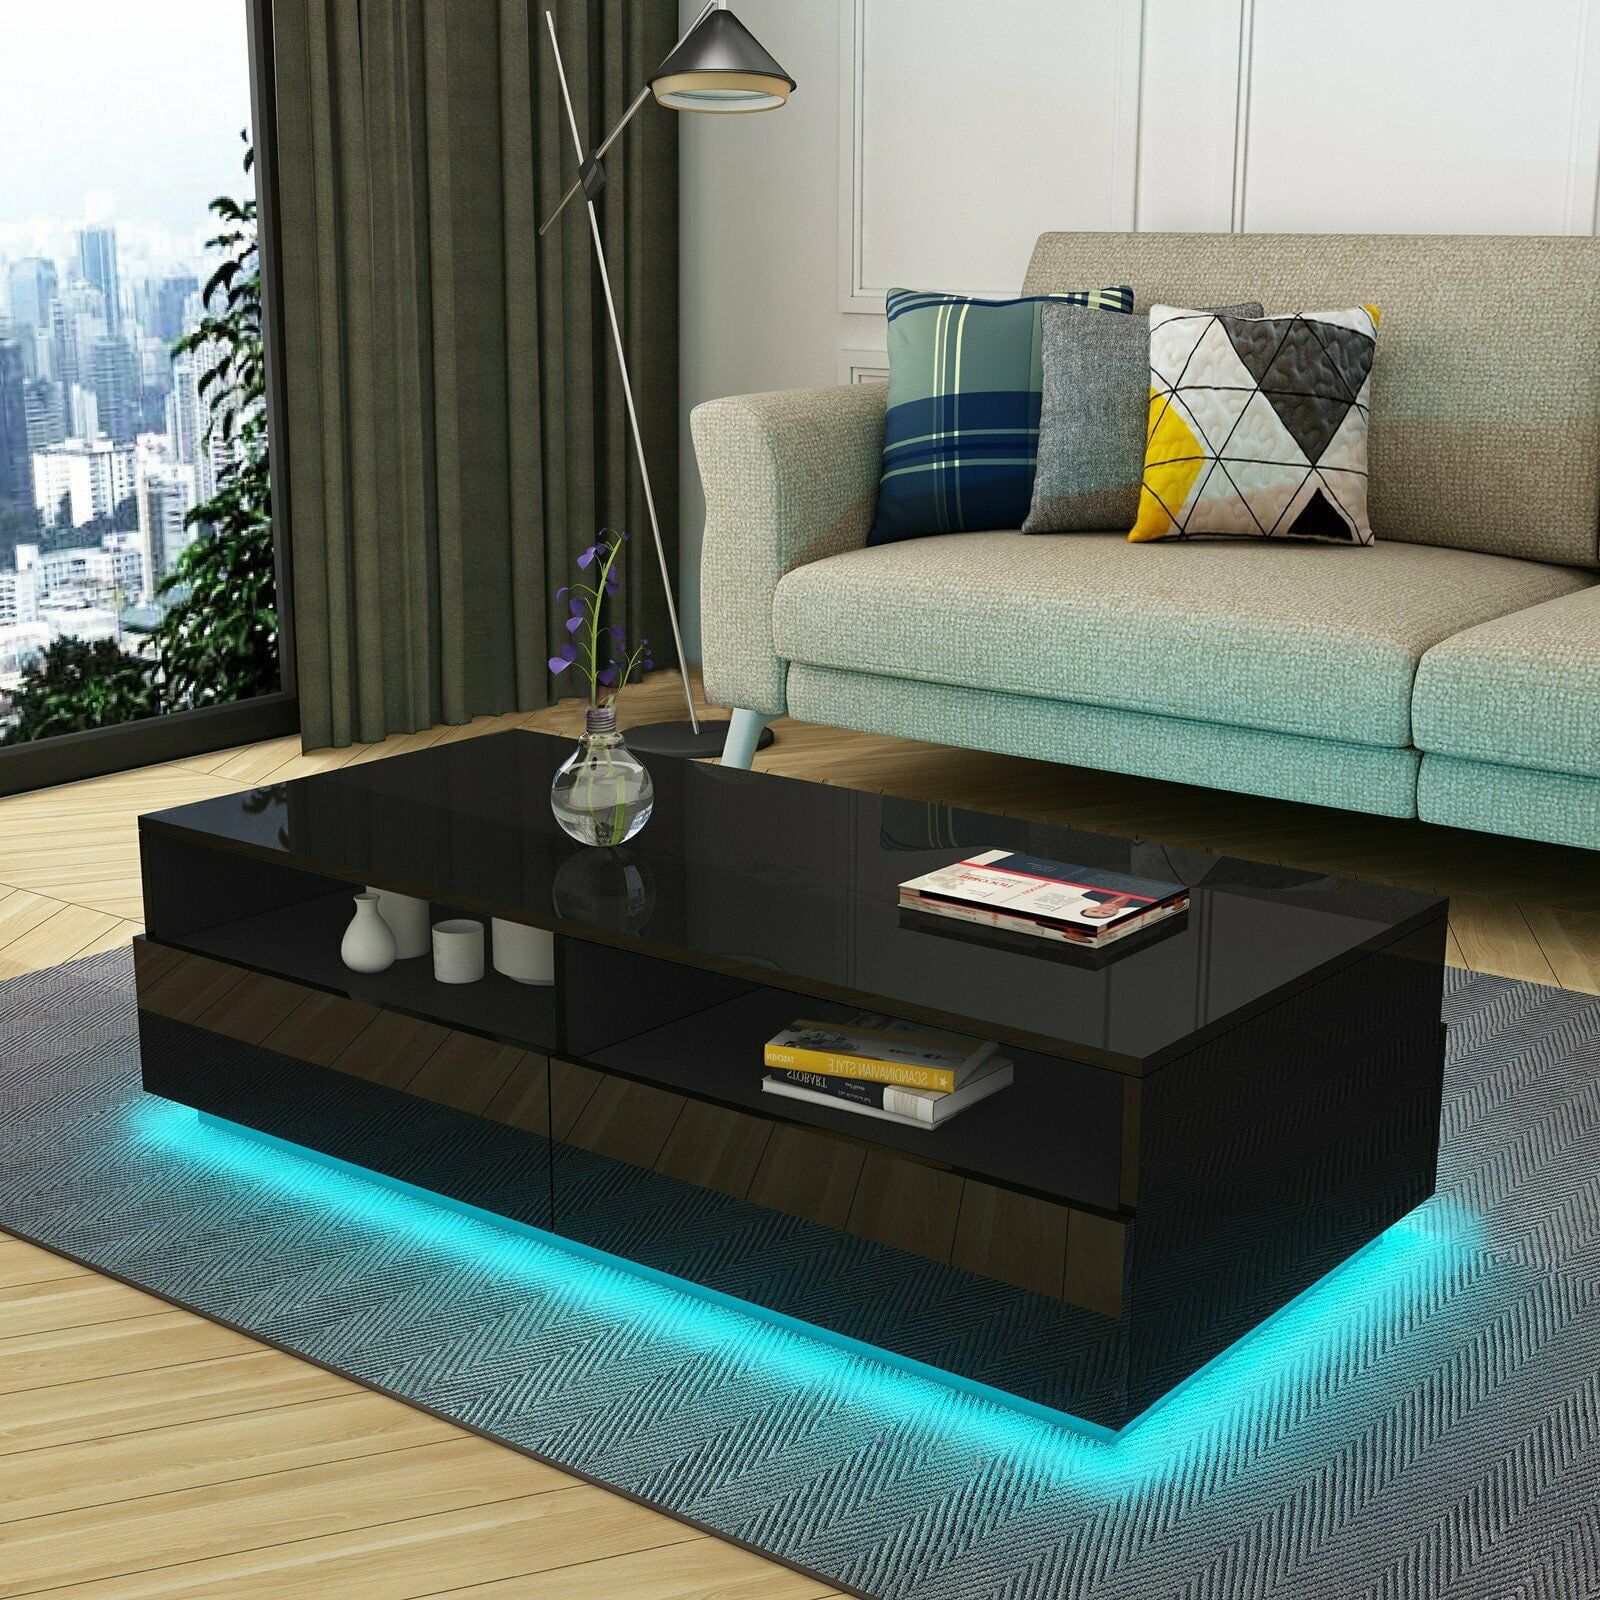 Led Rectangular Coffee Table Tea Modern Living Room Furniture Black Within Coffee Tables With Led Lights (Photo 15 of 15)